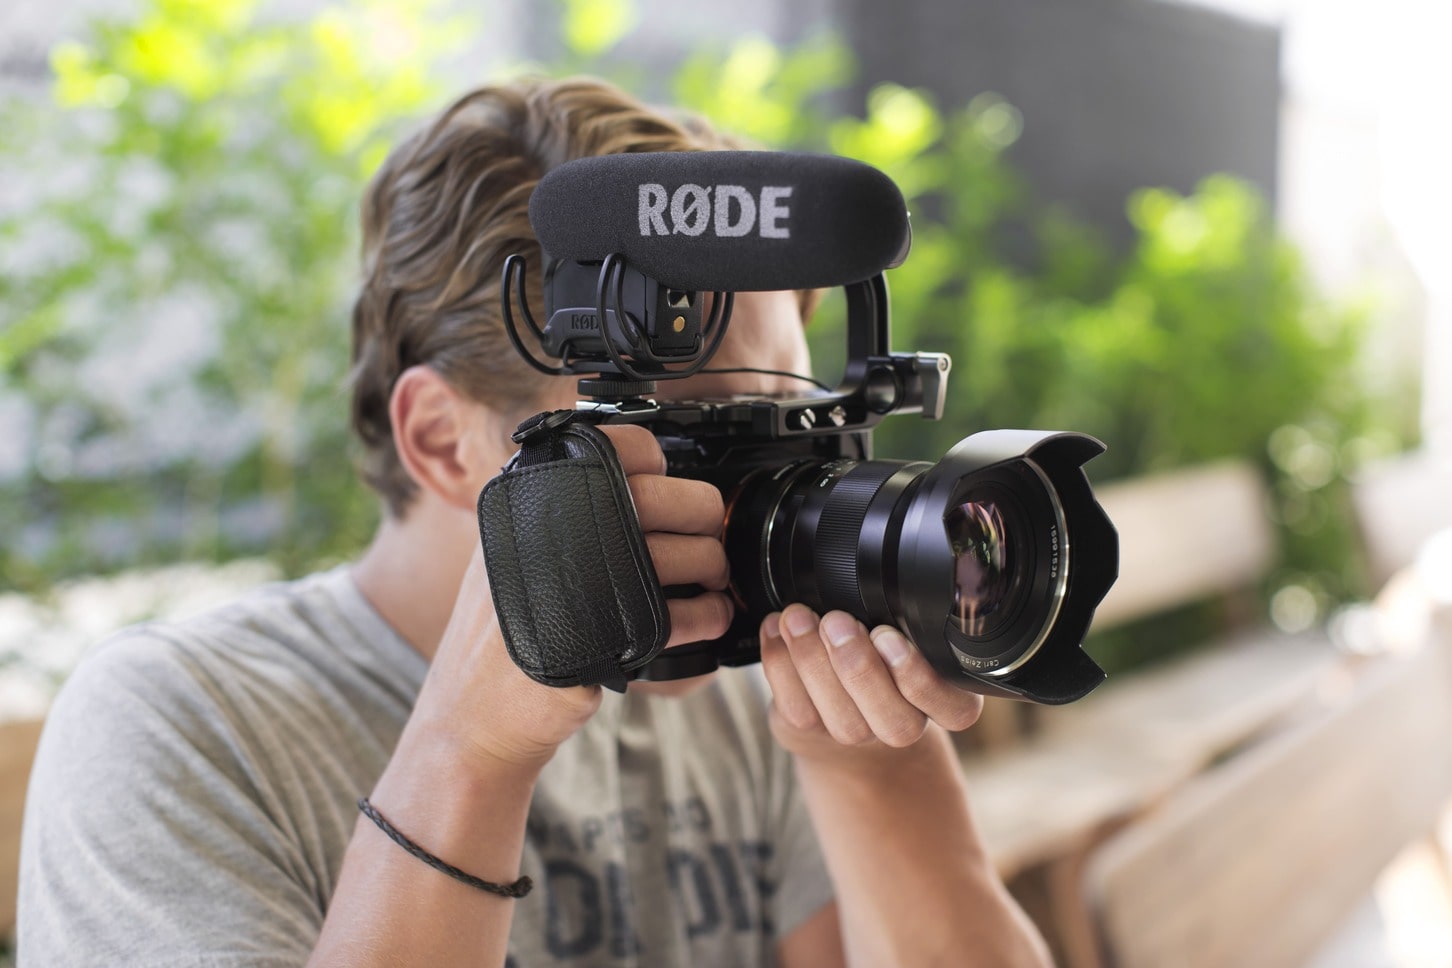 Rode Videomic pro with Rycote Lyre